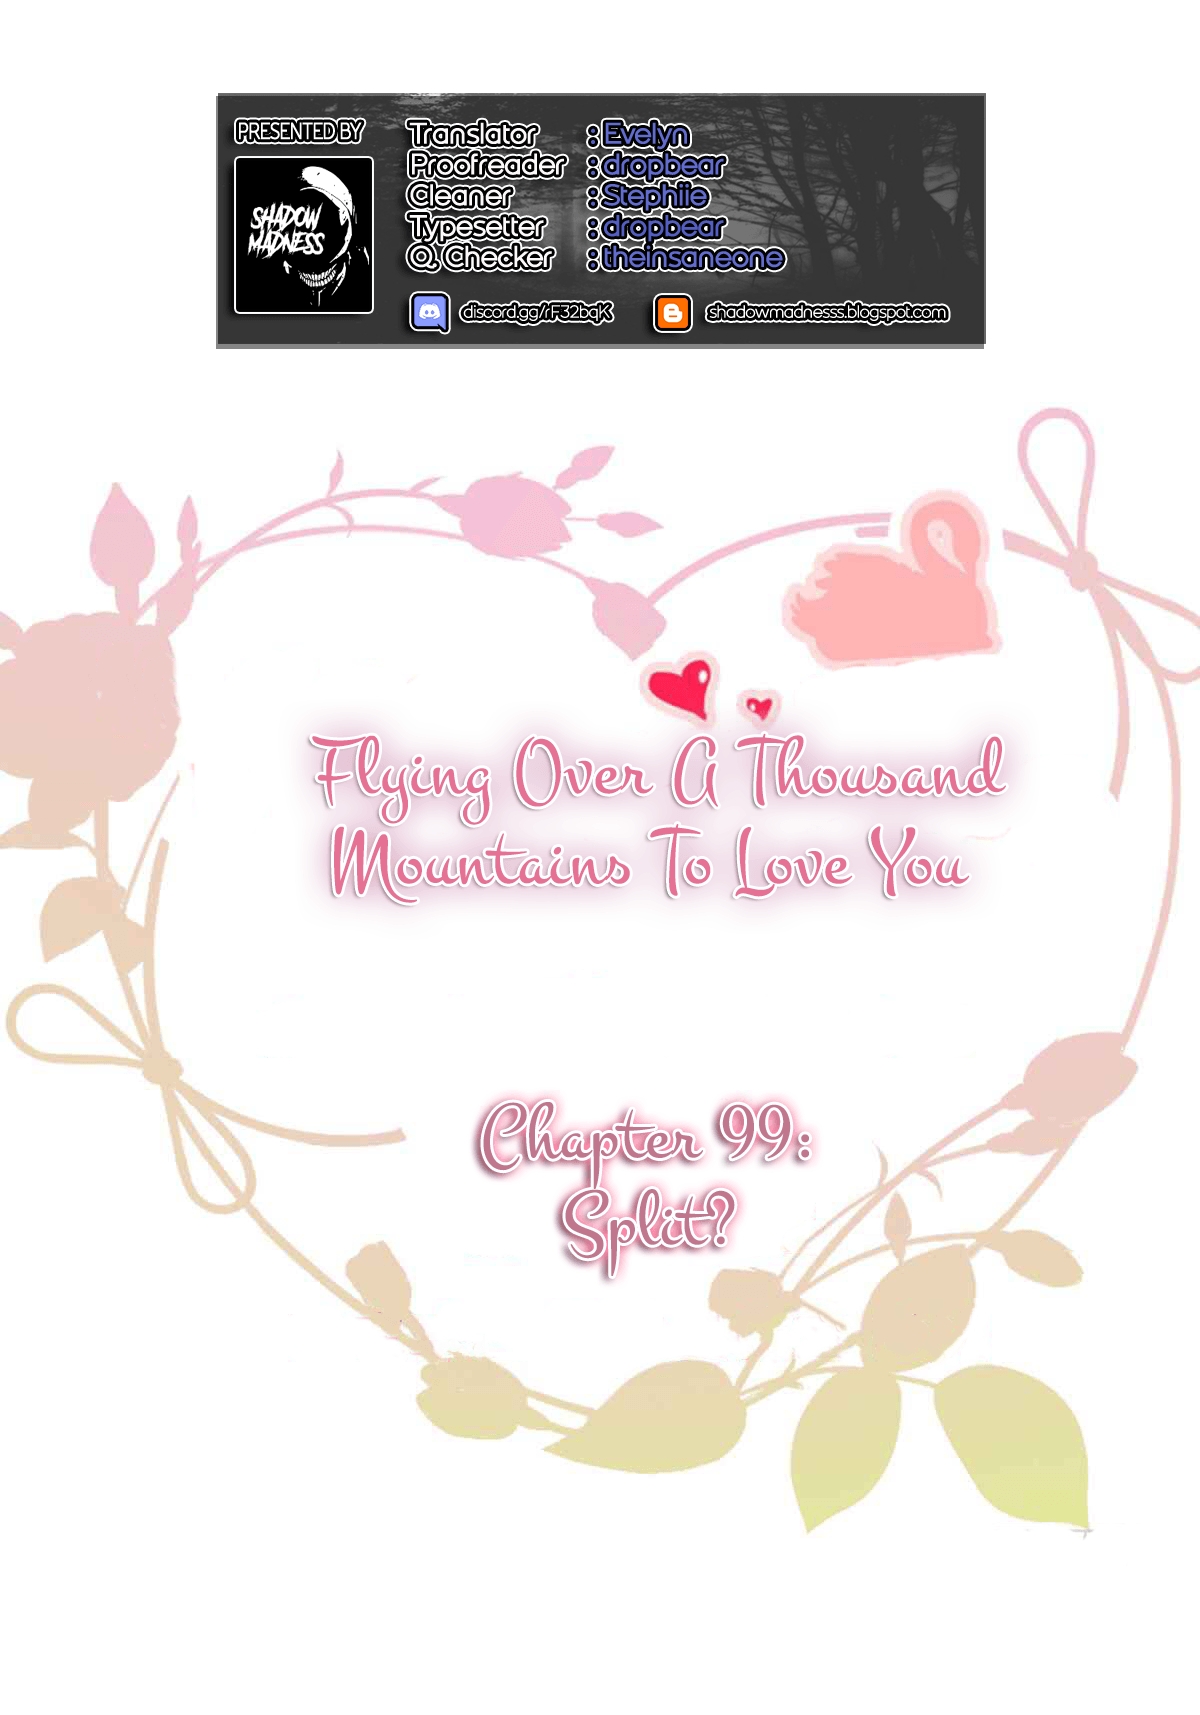 Flying Over a Thousand Mountains to Love You Ch. 99 Split?